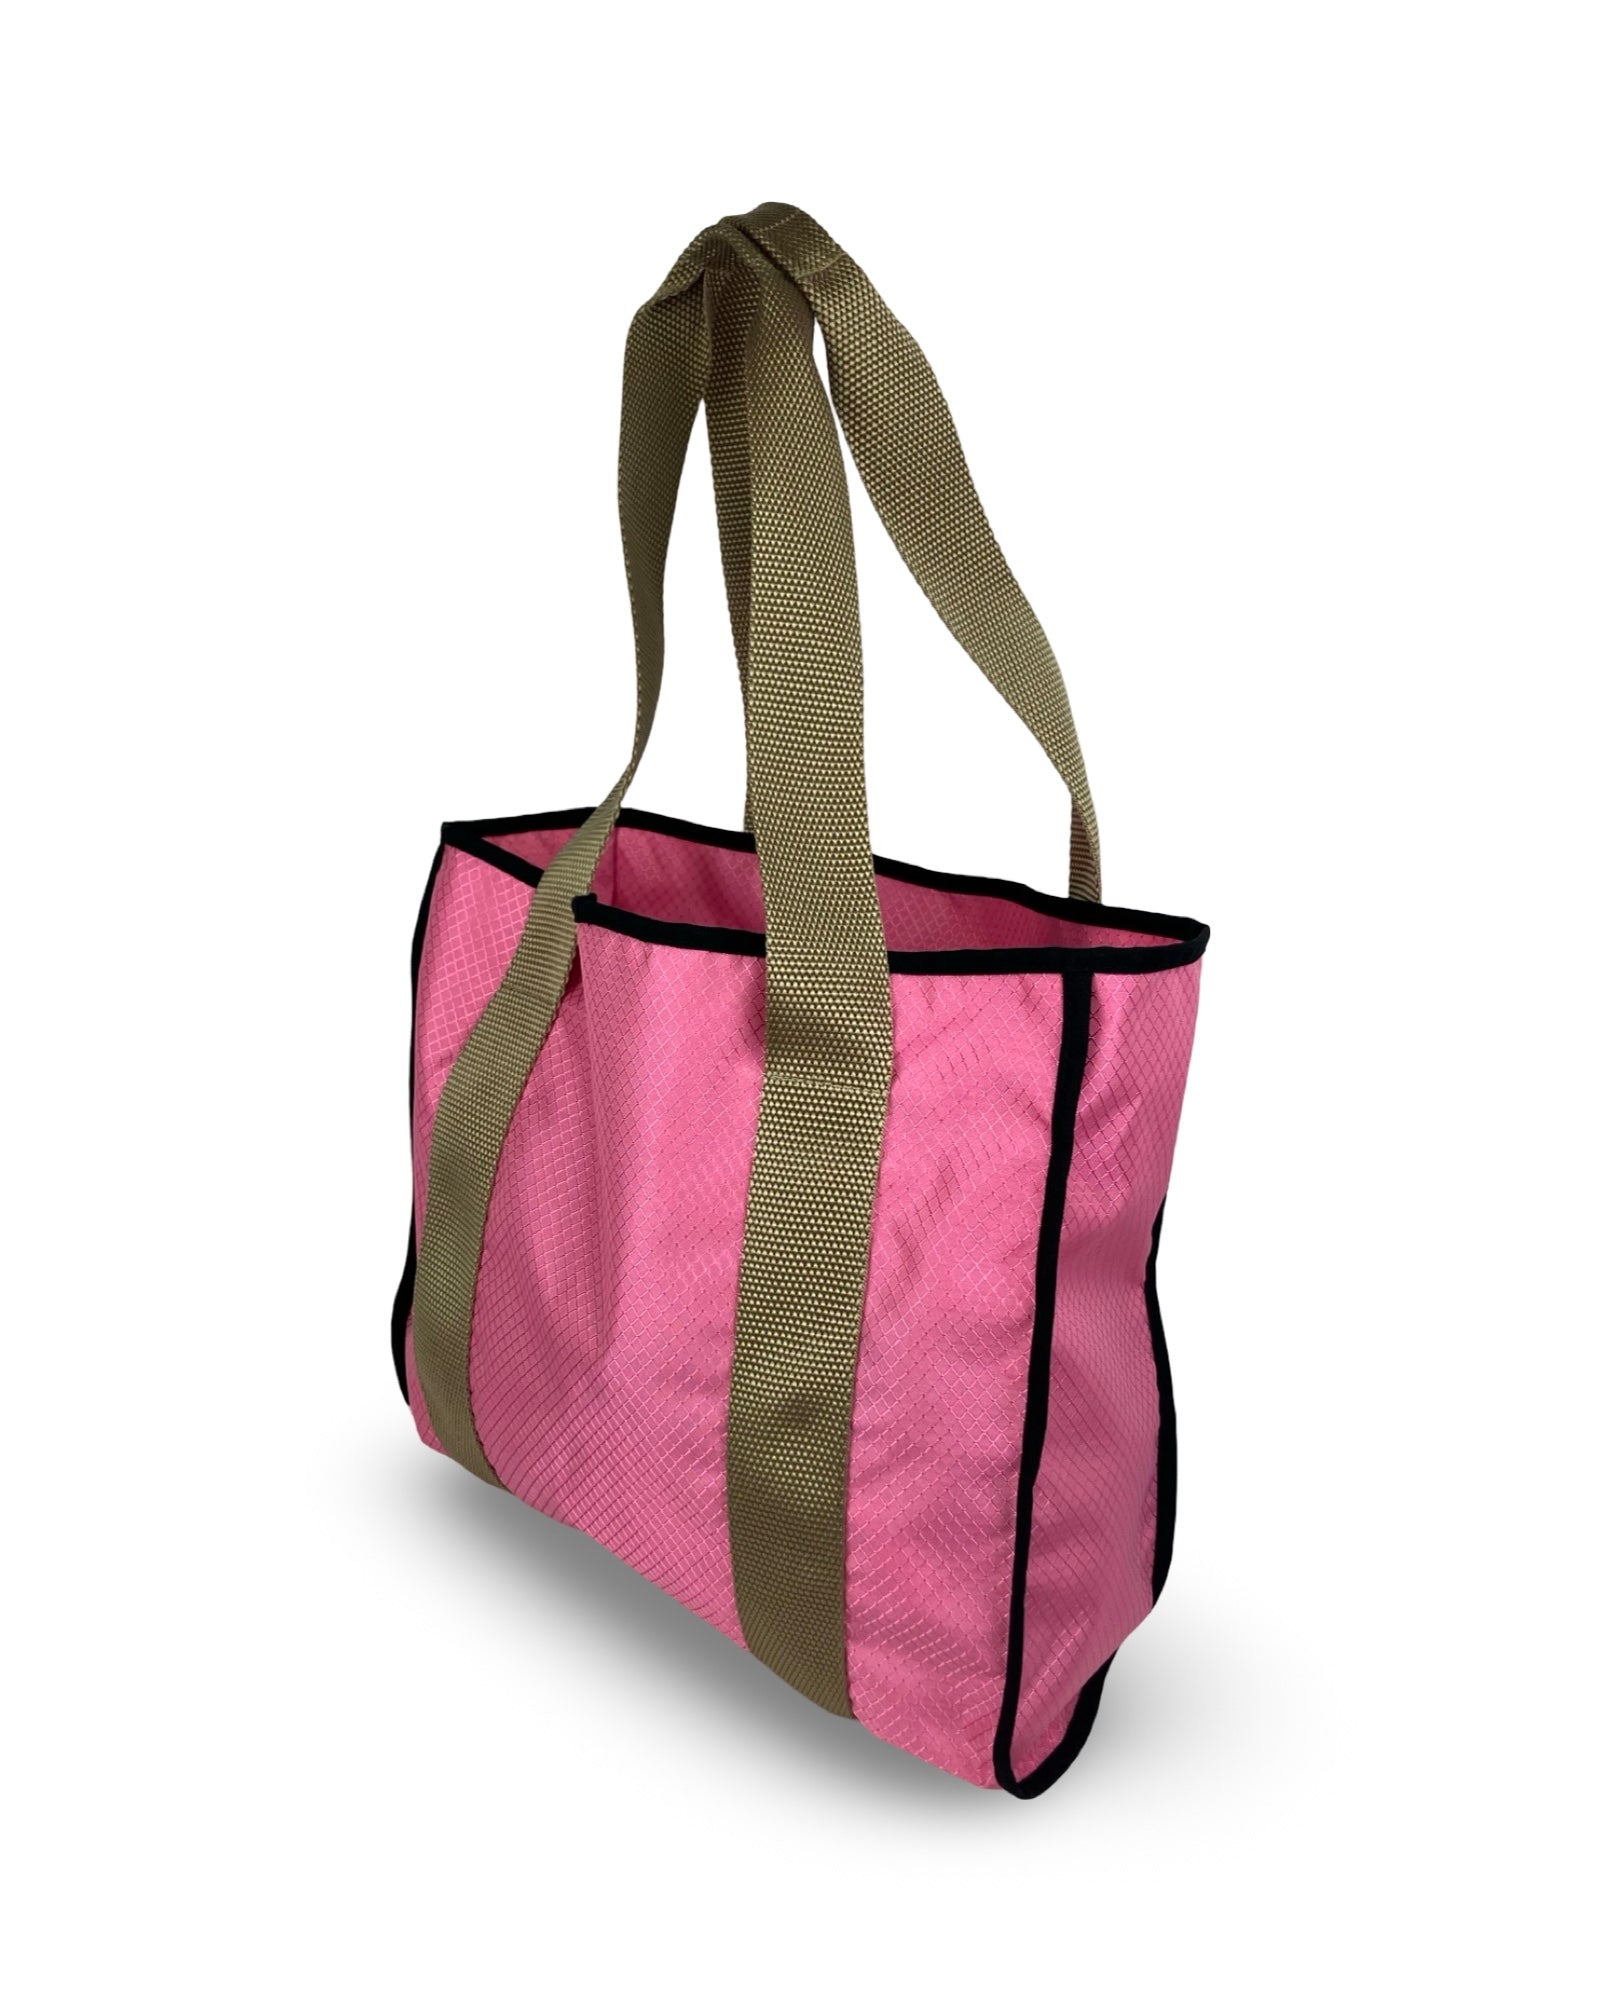 CLASSIC TOTE Tote Bags, by Tough Traveler. Made in USA since 1970